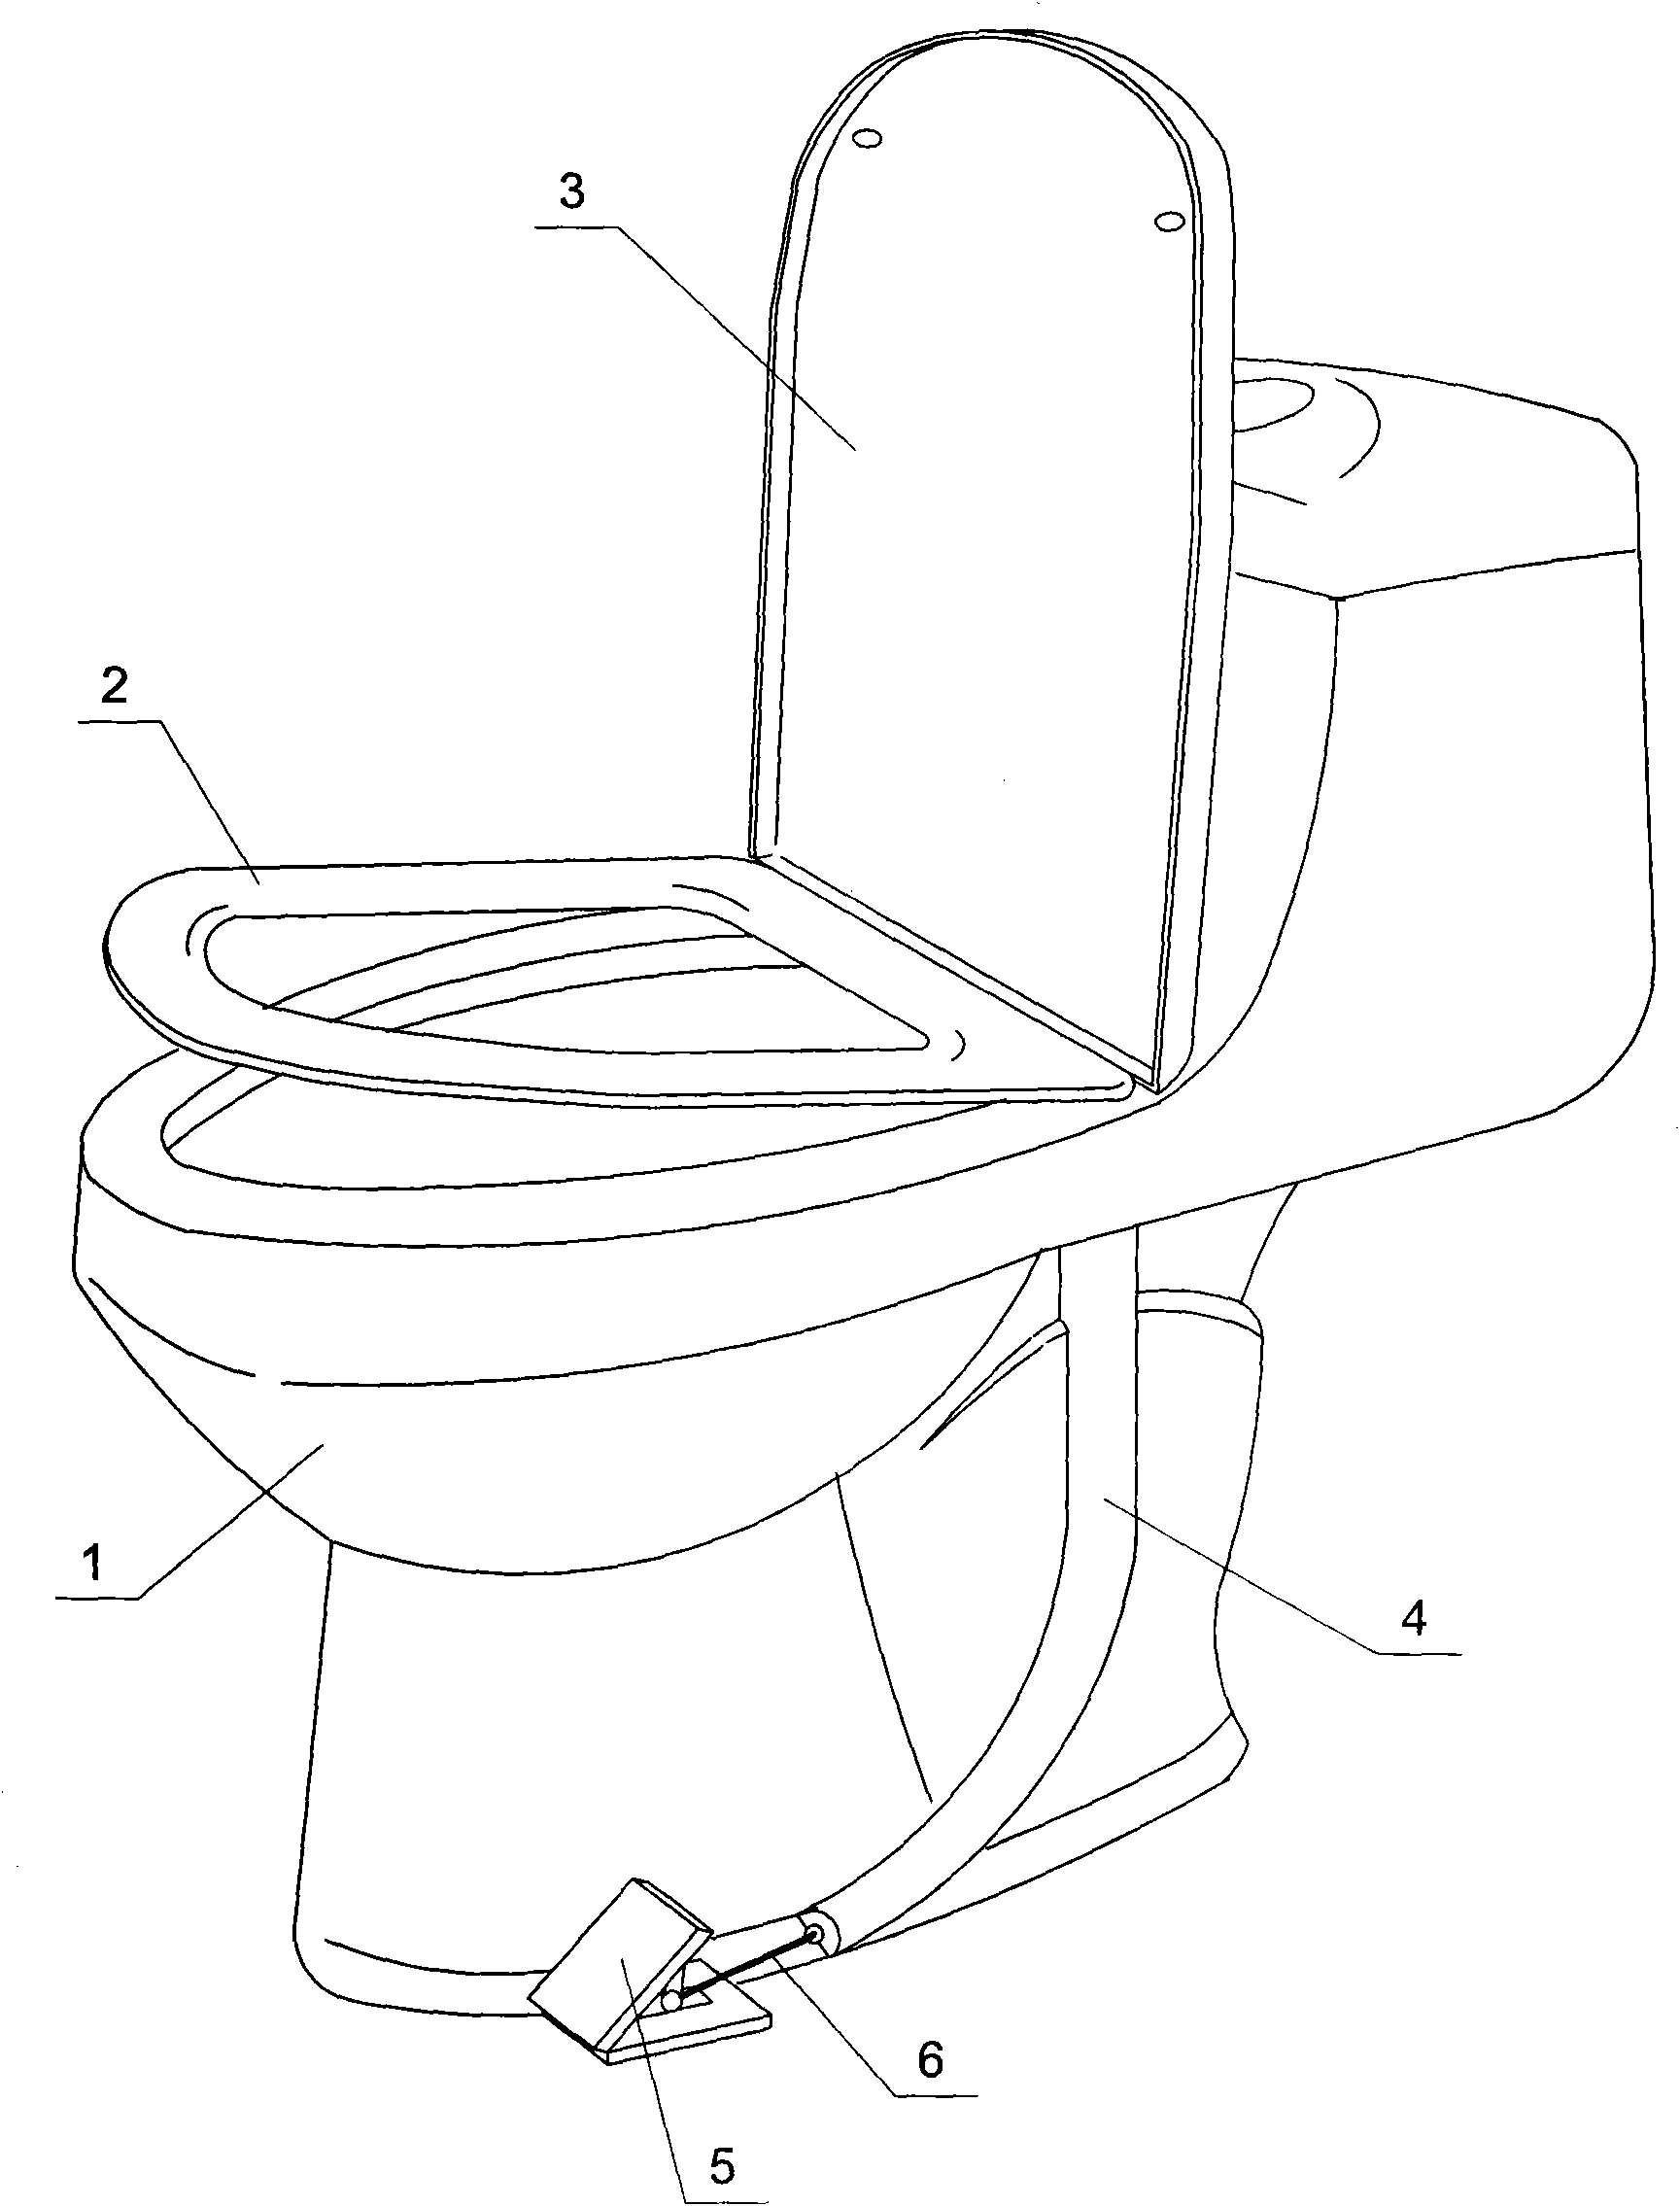 Pedal self-cover overturning toilet bowl